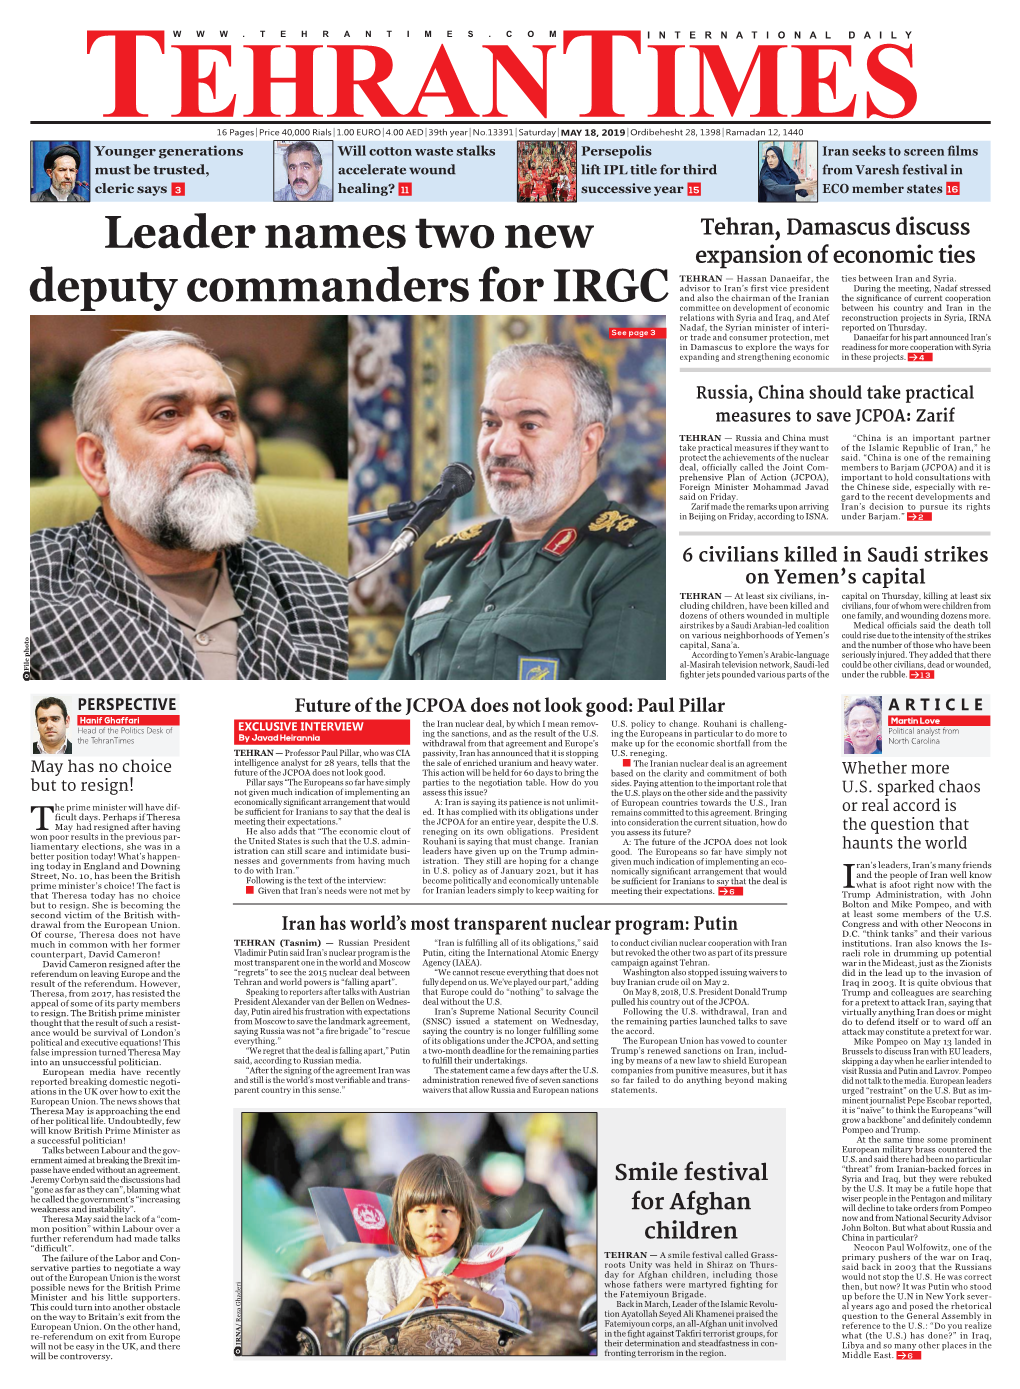 Leader Names Two New Deputy Commanders for IRGC